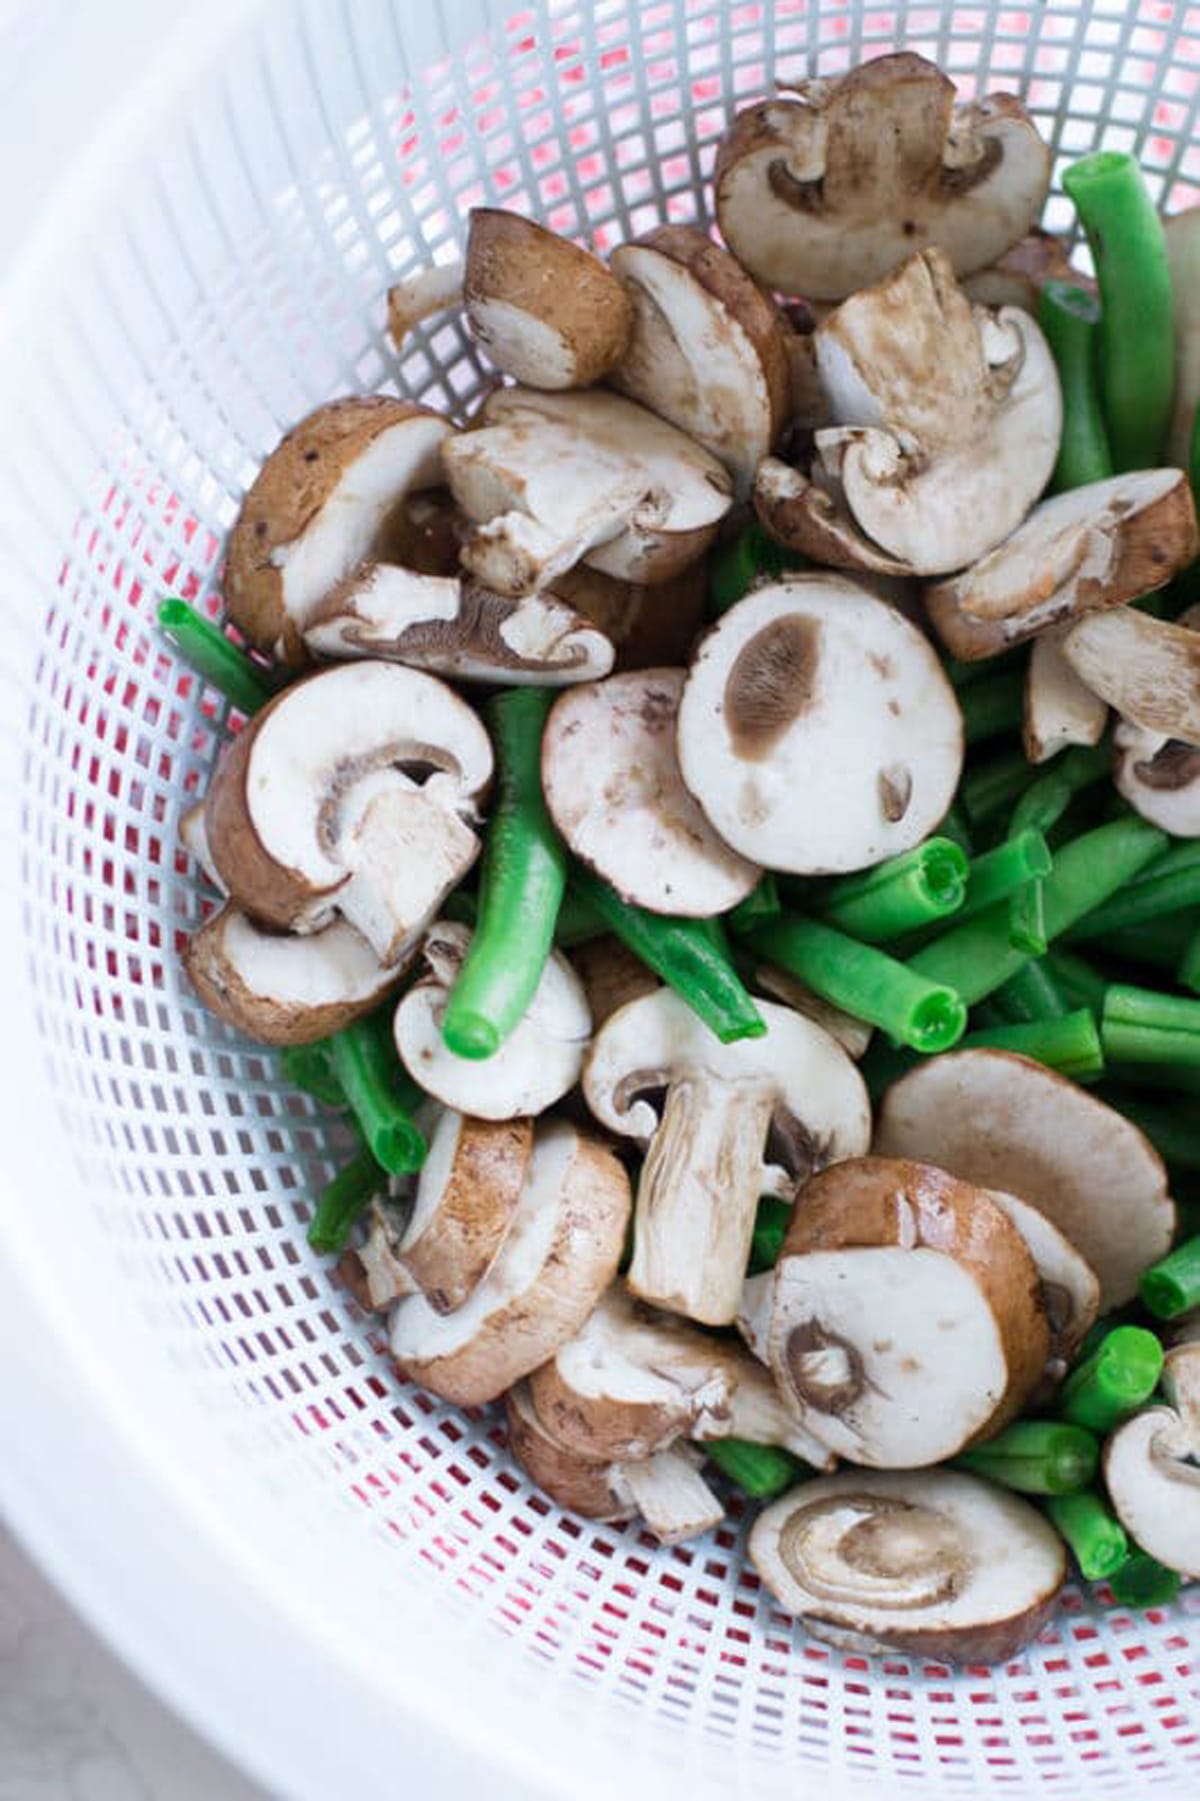 Sliced mushrooms and cut fresh green beans in a colander.